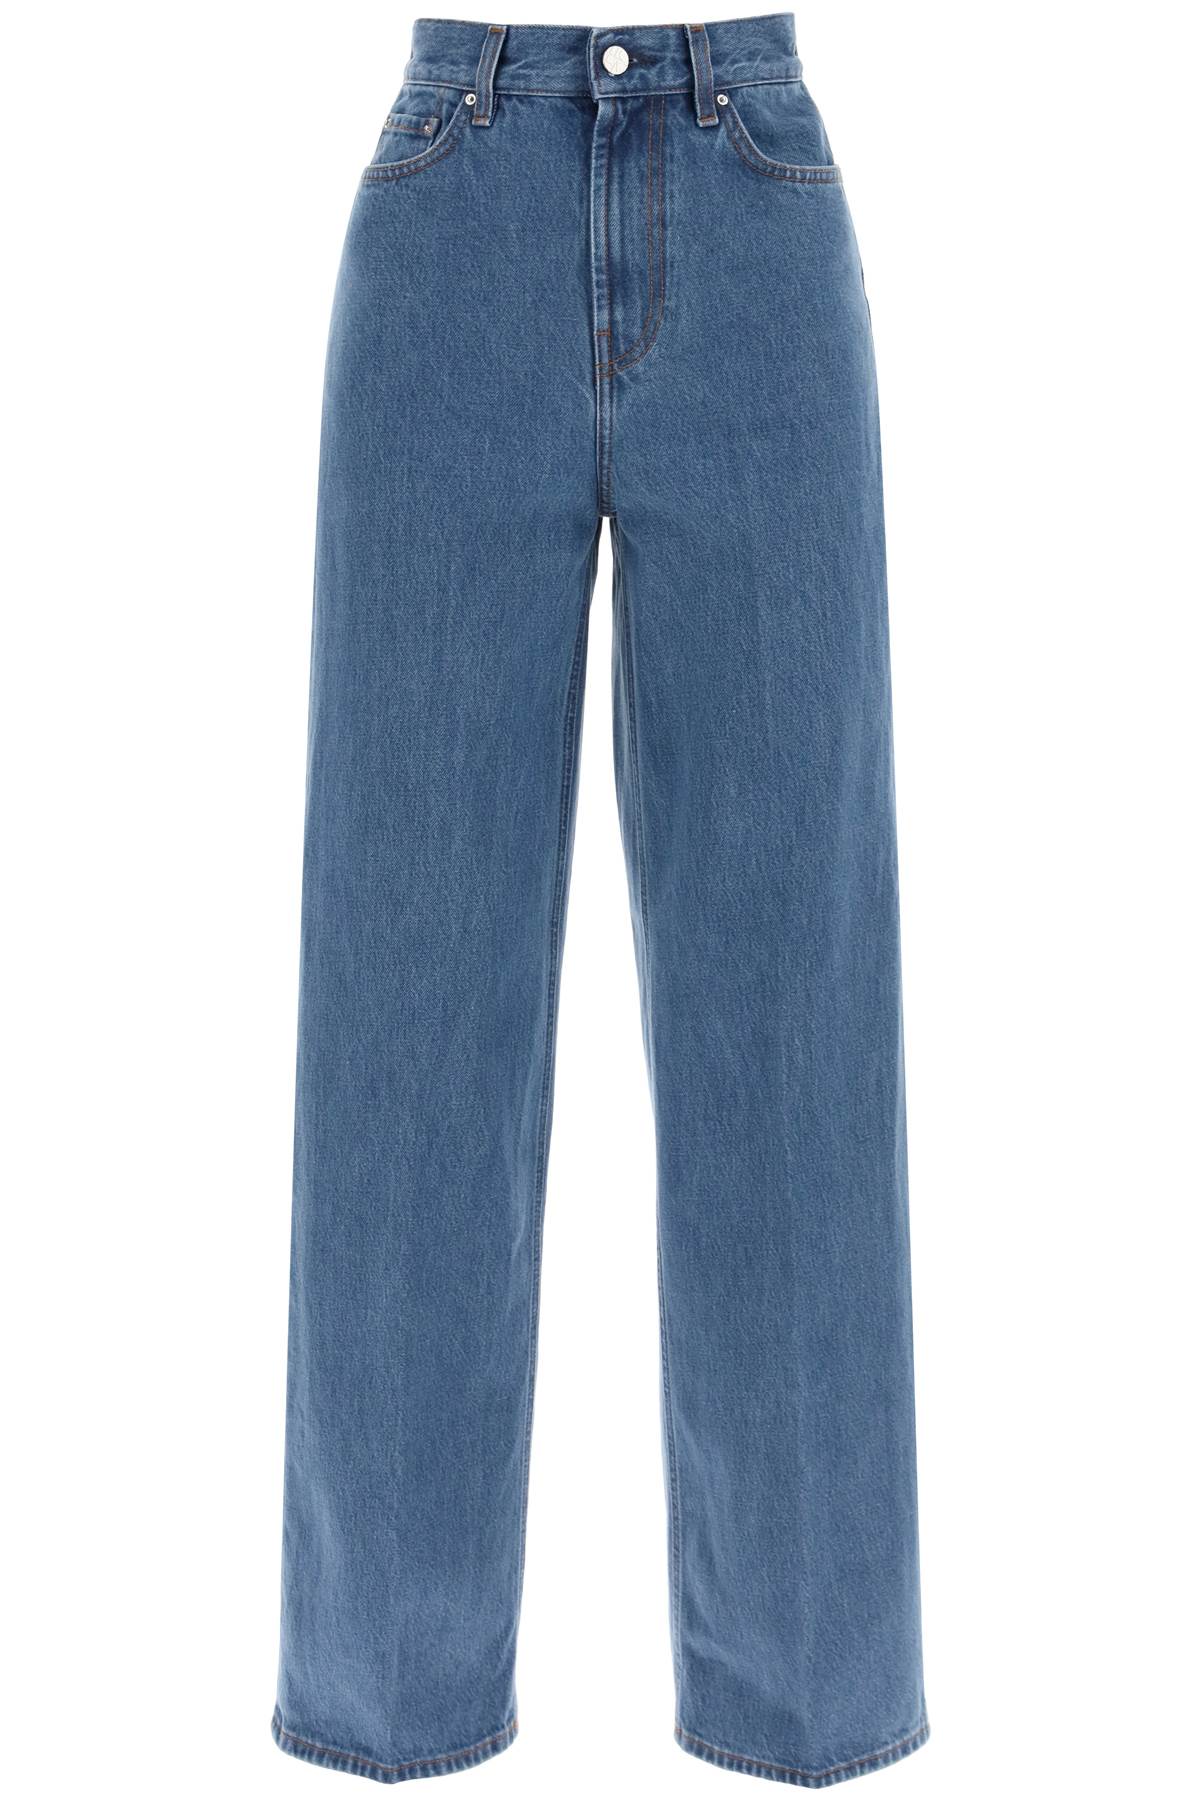 Toteme TOTEME wide leg jeans in organic cotton